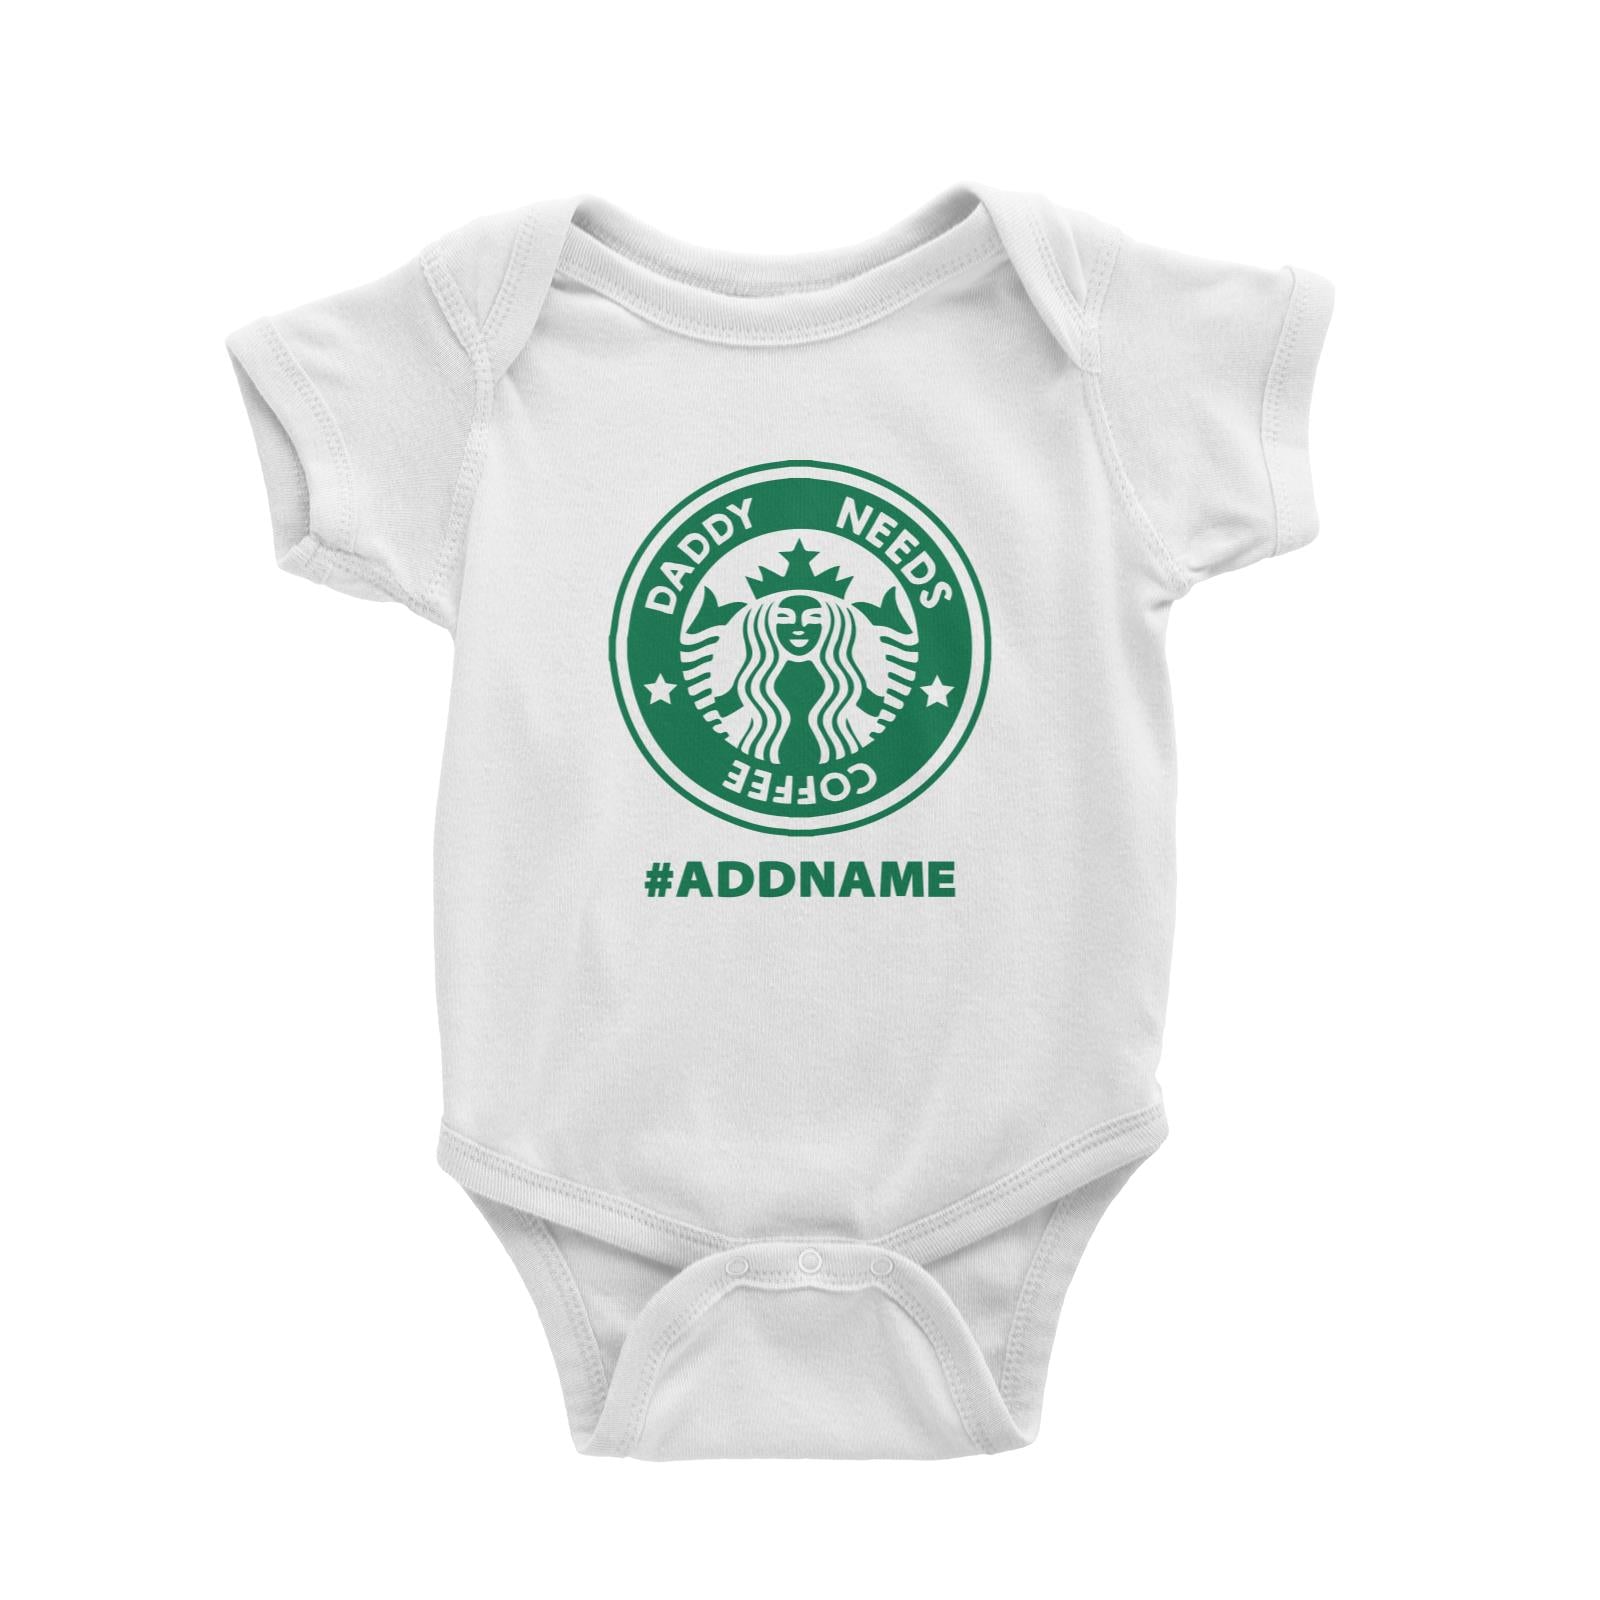 Daddy Needs Coffee White Baby Romper